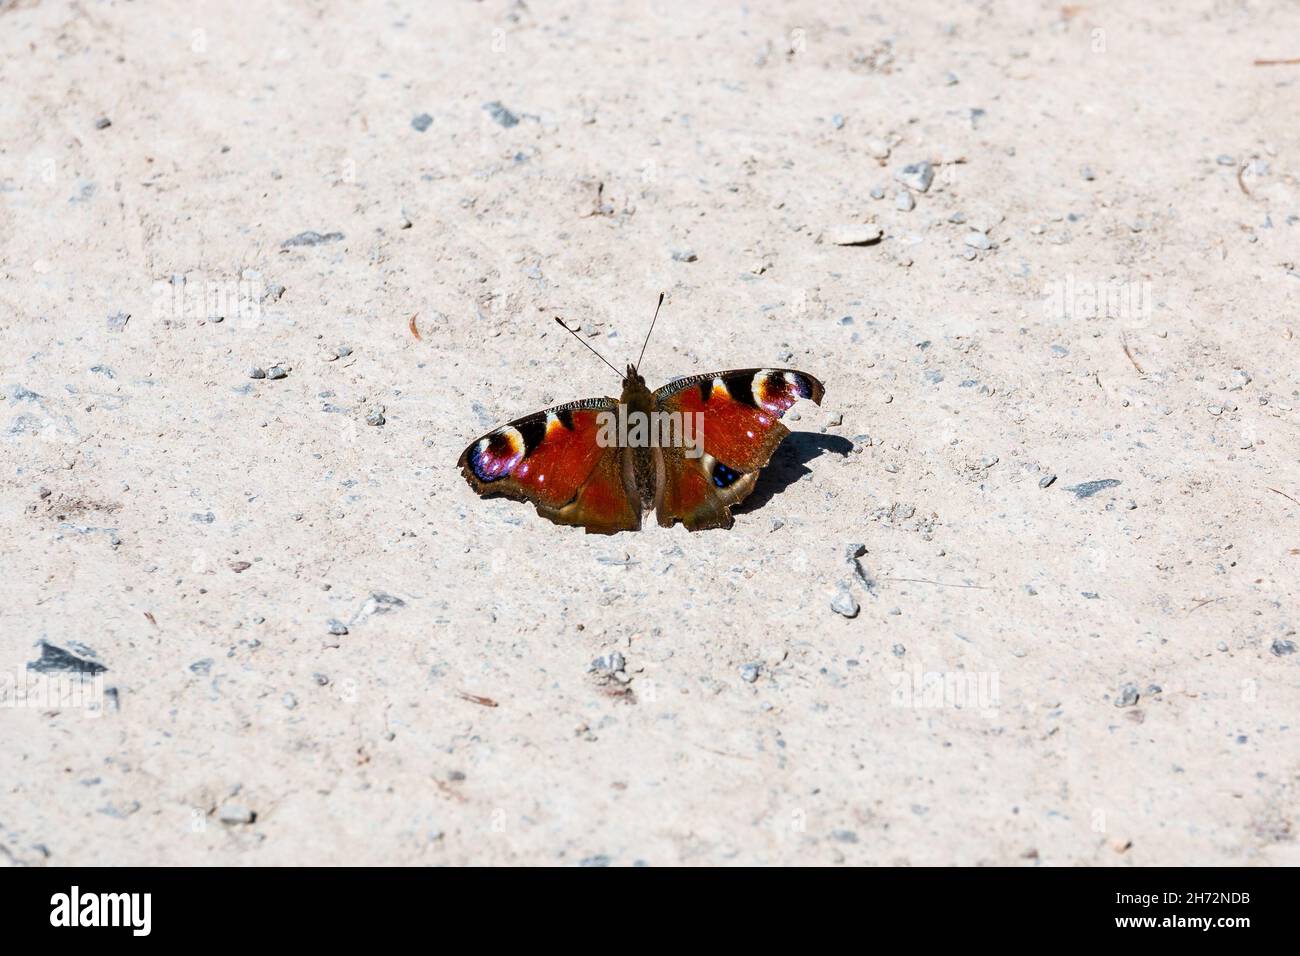 A peacock butterfly on the white stony ground Stock Photo